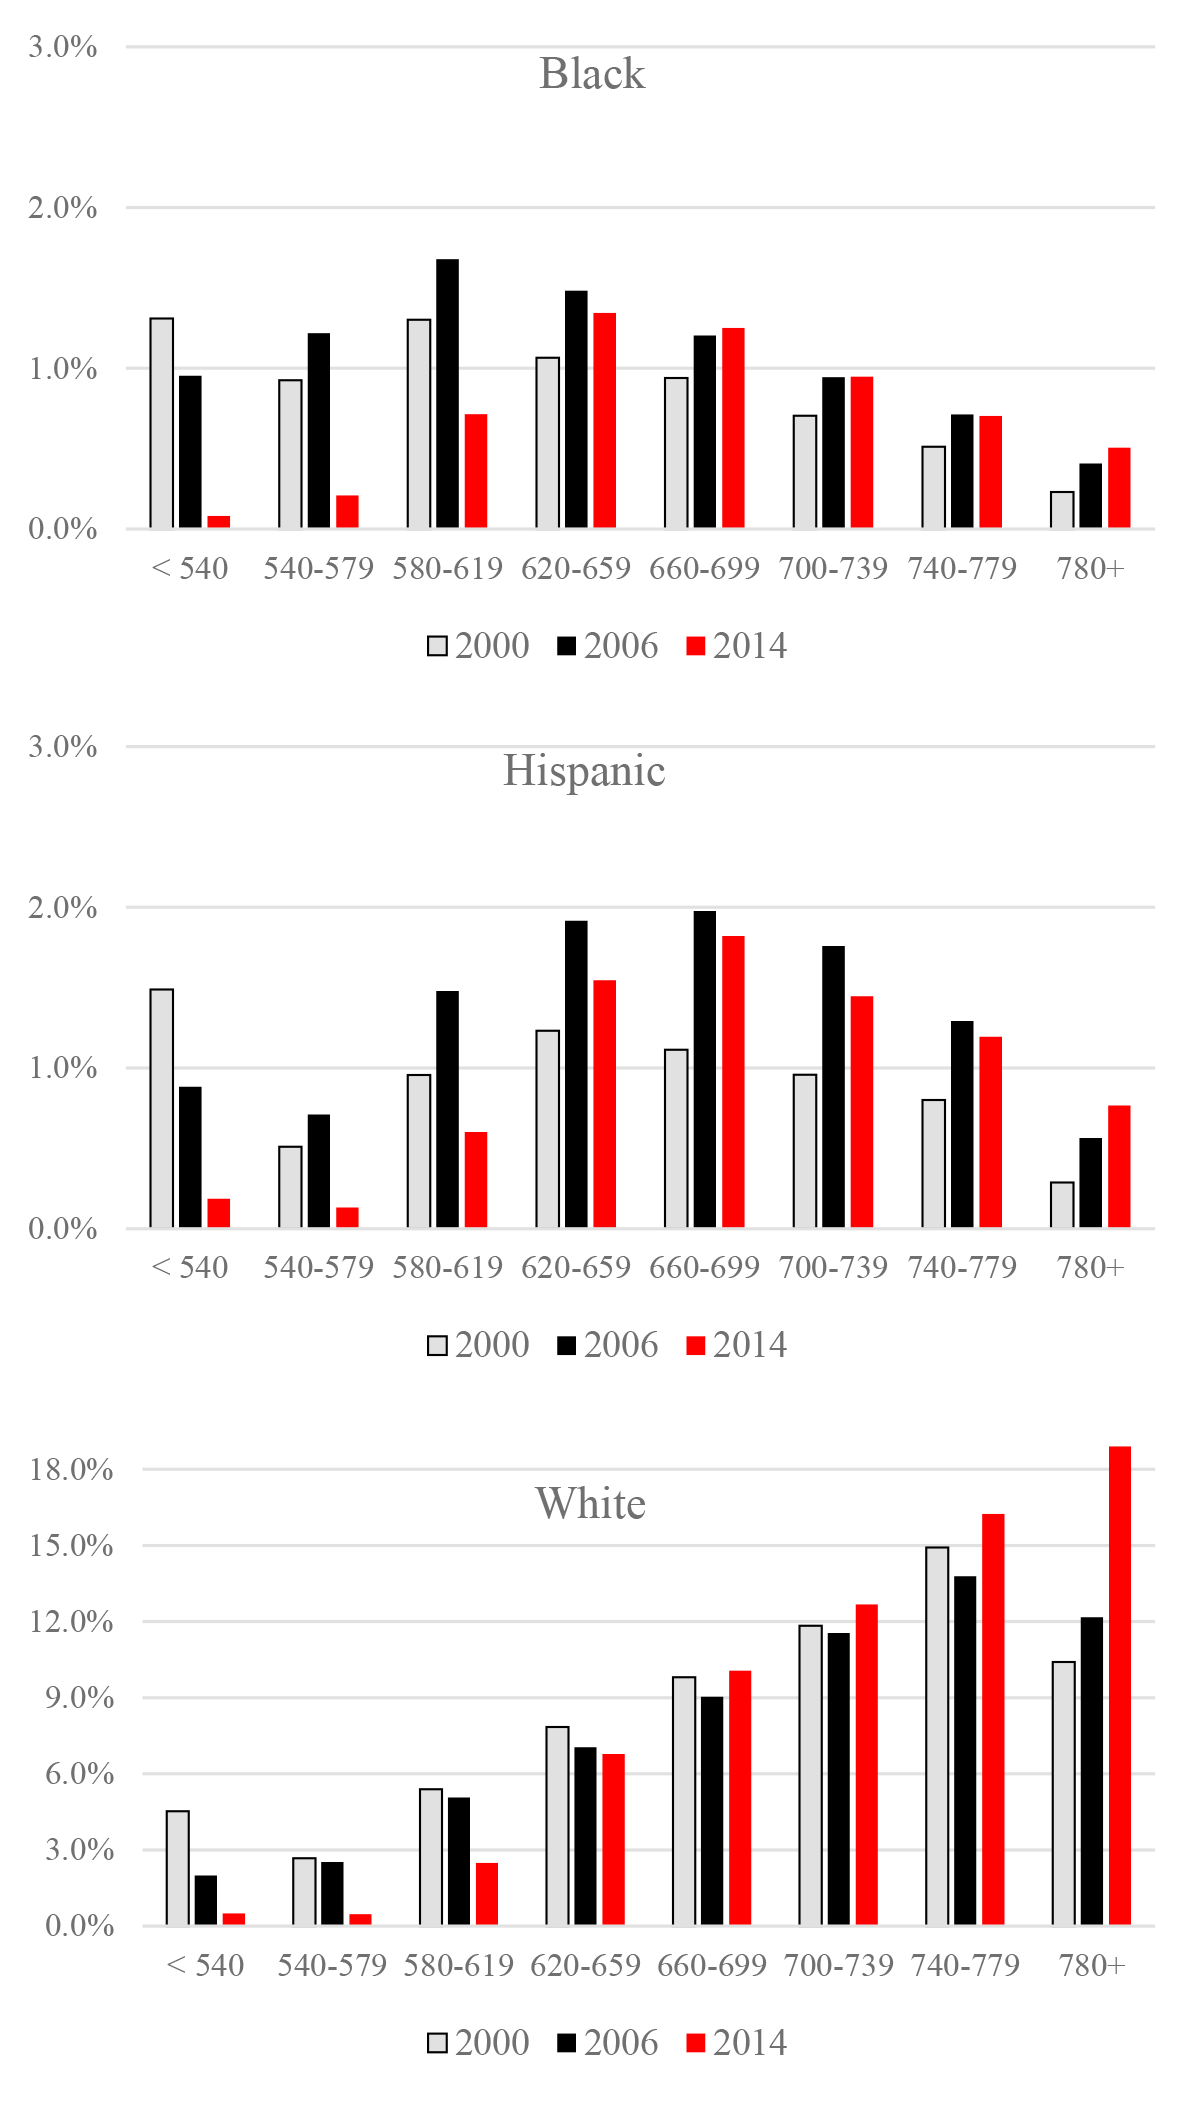 Figure 3: Market shares by race and ethnicity, and by credit score. See accessible link for data description.